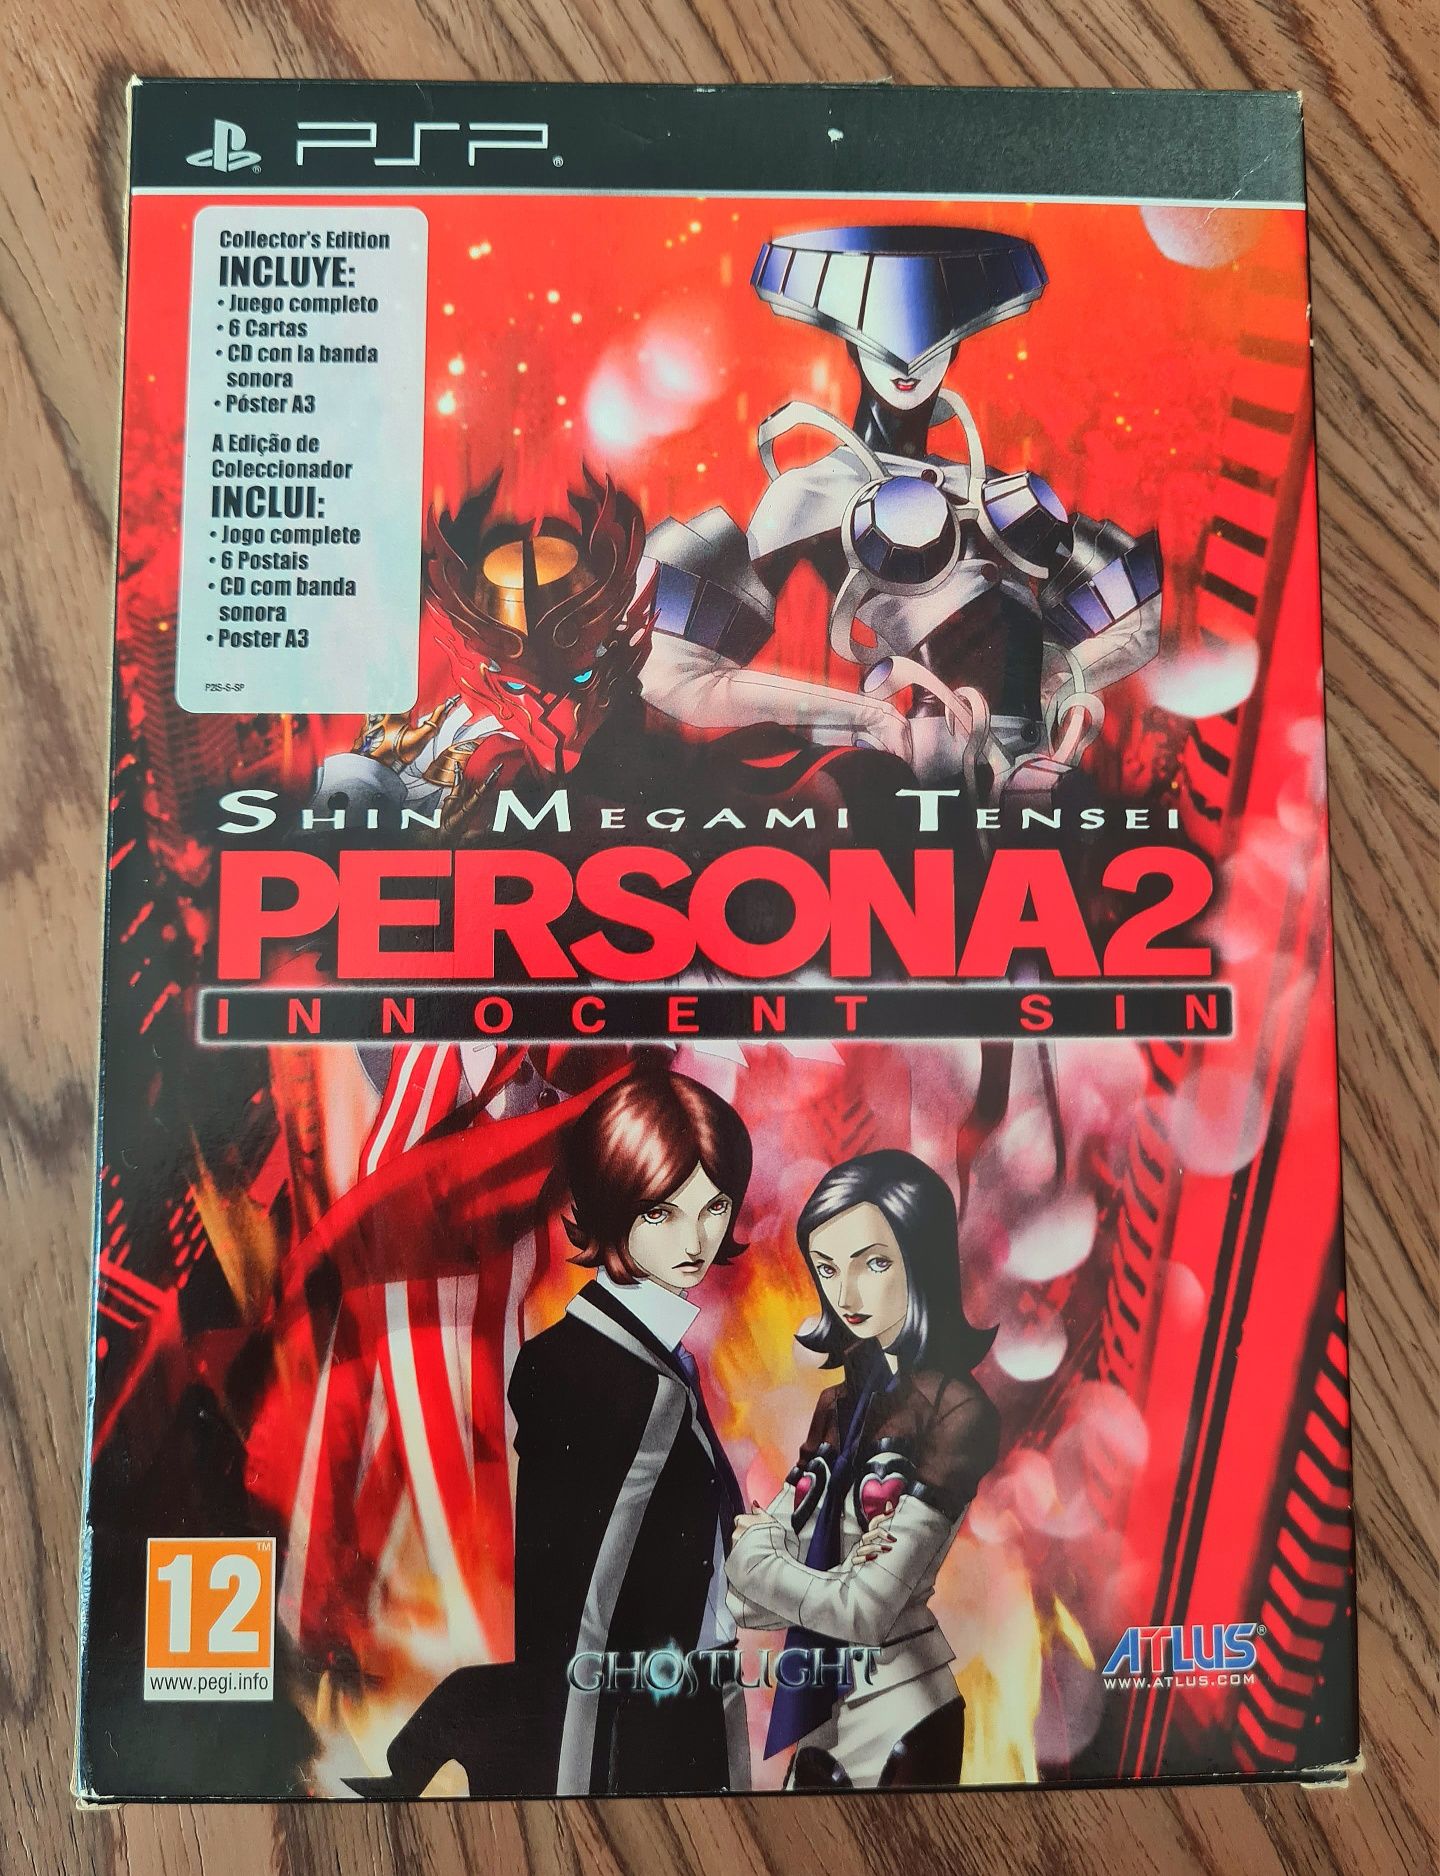 Persona 2 Innocent Sin Collector's Edition